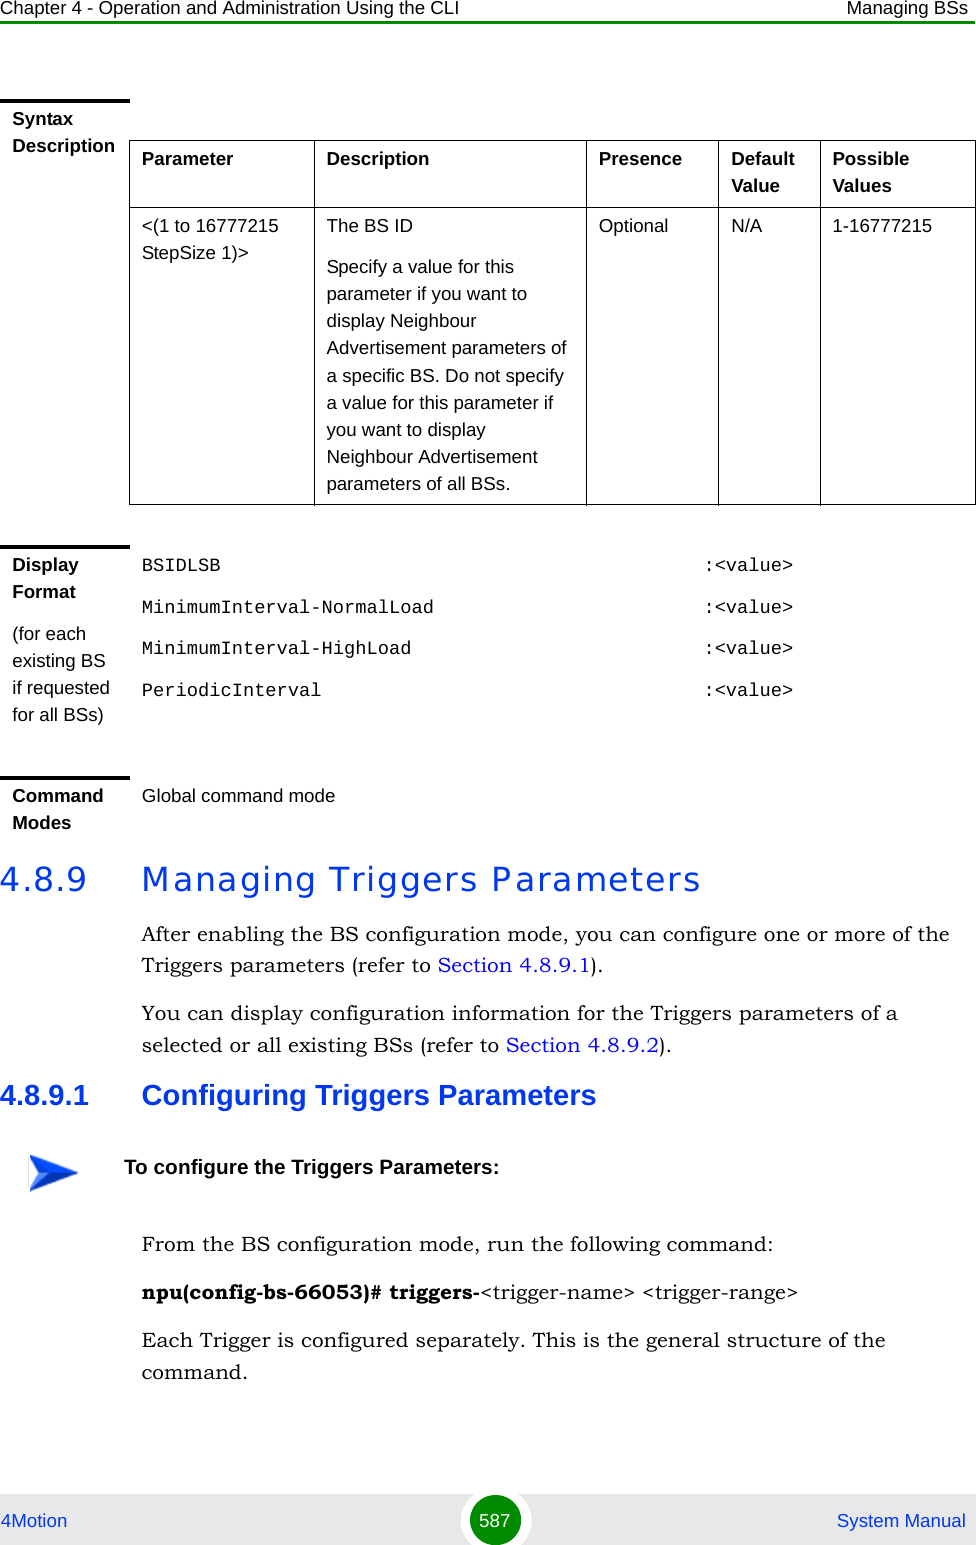 Chapter 4 - Operation and Administration Using the CLI Managing BSs4Motion 587  System Manual4.8.9 Managing Triggers ParametersAfter enabling the BS configuration mode, you can configure one or more of the Triggers parameters (refer to Section 4.8.9.1).You can display configuration information for the Triggers parameters of a selected or all existing BSs (refer to Section 4.8.9.2).4.8.9.1 Configuring Triggers ParametersFrom the BS configuration mode, run the following command:npu(config-bs-66053)# triggers-&lt;trigger-name&gt; &lt;trigger-range&gt;Each Trigger is configured separately. This is the general structure of the command.Syntax Description Parameter Description Presence Default ValuePossible Values&lt;(1 to 16777215 StepSize 1)&gt;The BS ID Specify a value for this parameter if you want to display Neighbour Advertisement parameters of a specific BS. Do not specify a value for this parameter if you want to display Neighbour Advertisement parameters of all BSs.Optional N/A 1-16777215Display Format(for each existing BS if requested for all BSs)BSIDLSB                                           :&lt;value&gt;MinimumInterval-NormalLoad                        :&lt;value&gt;MinimumInterval-HighLoad                          :&lt;value&gt;PeriodicInterval                                  :&lt;value&gt;Command ModesGlobal command modeTo configure the Triggers Parameters: